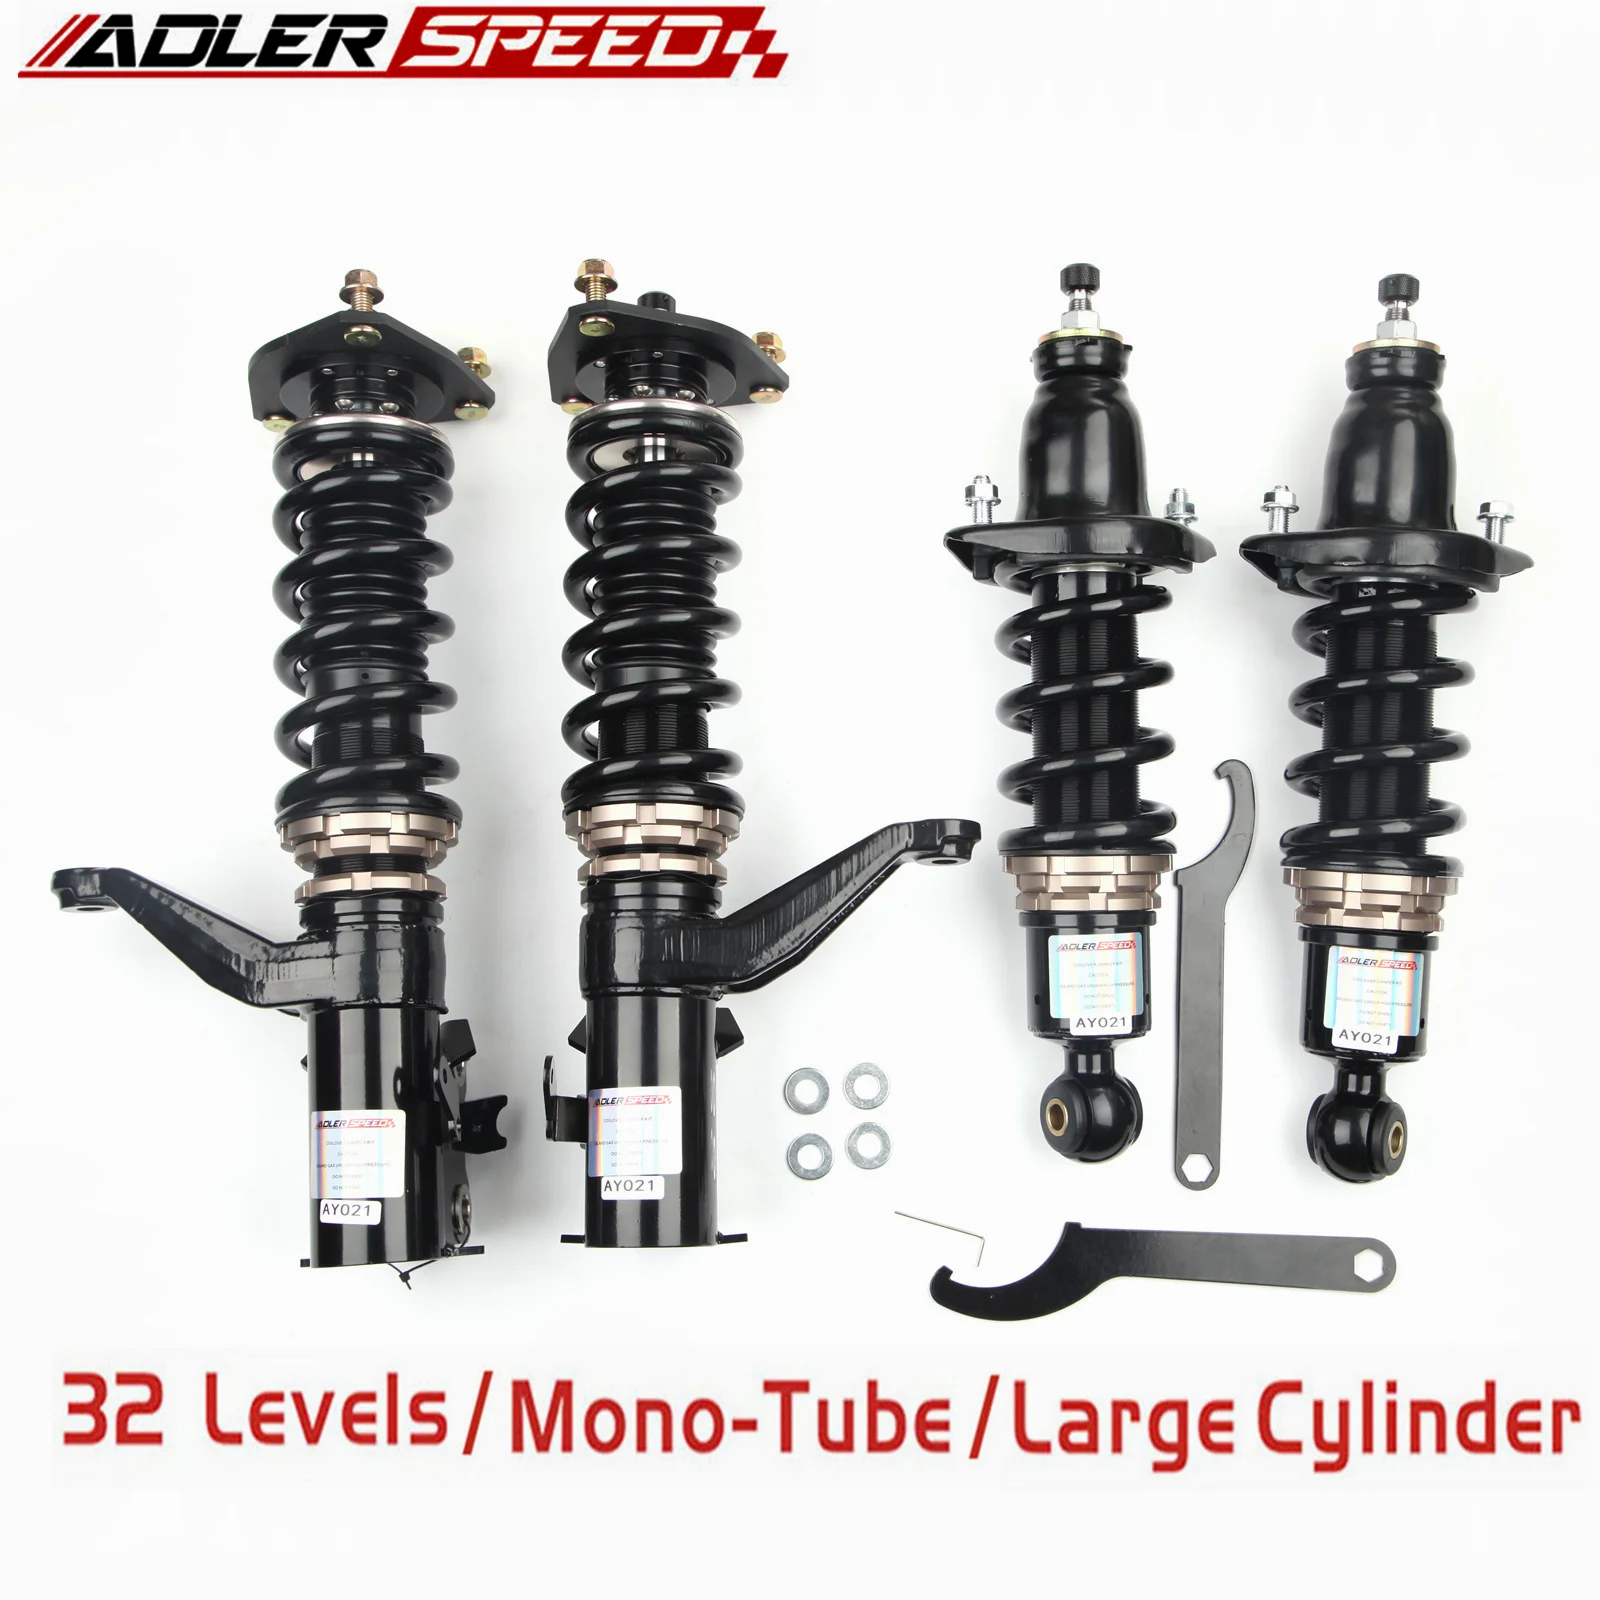 Coilovers Lowering Suspension Kit w/ 32 Level Damping For Acura RSX DC5 02-06